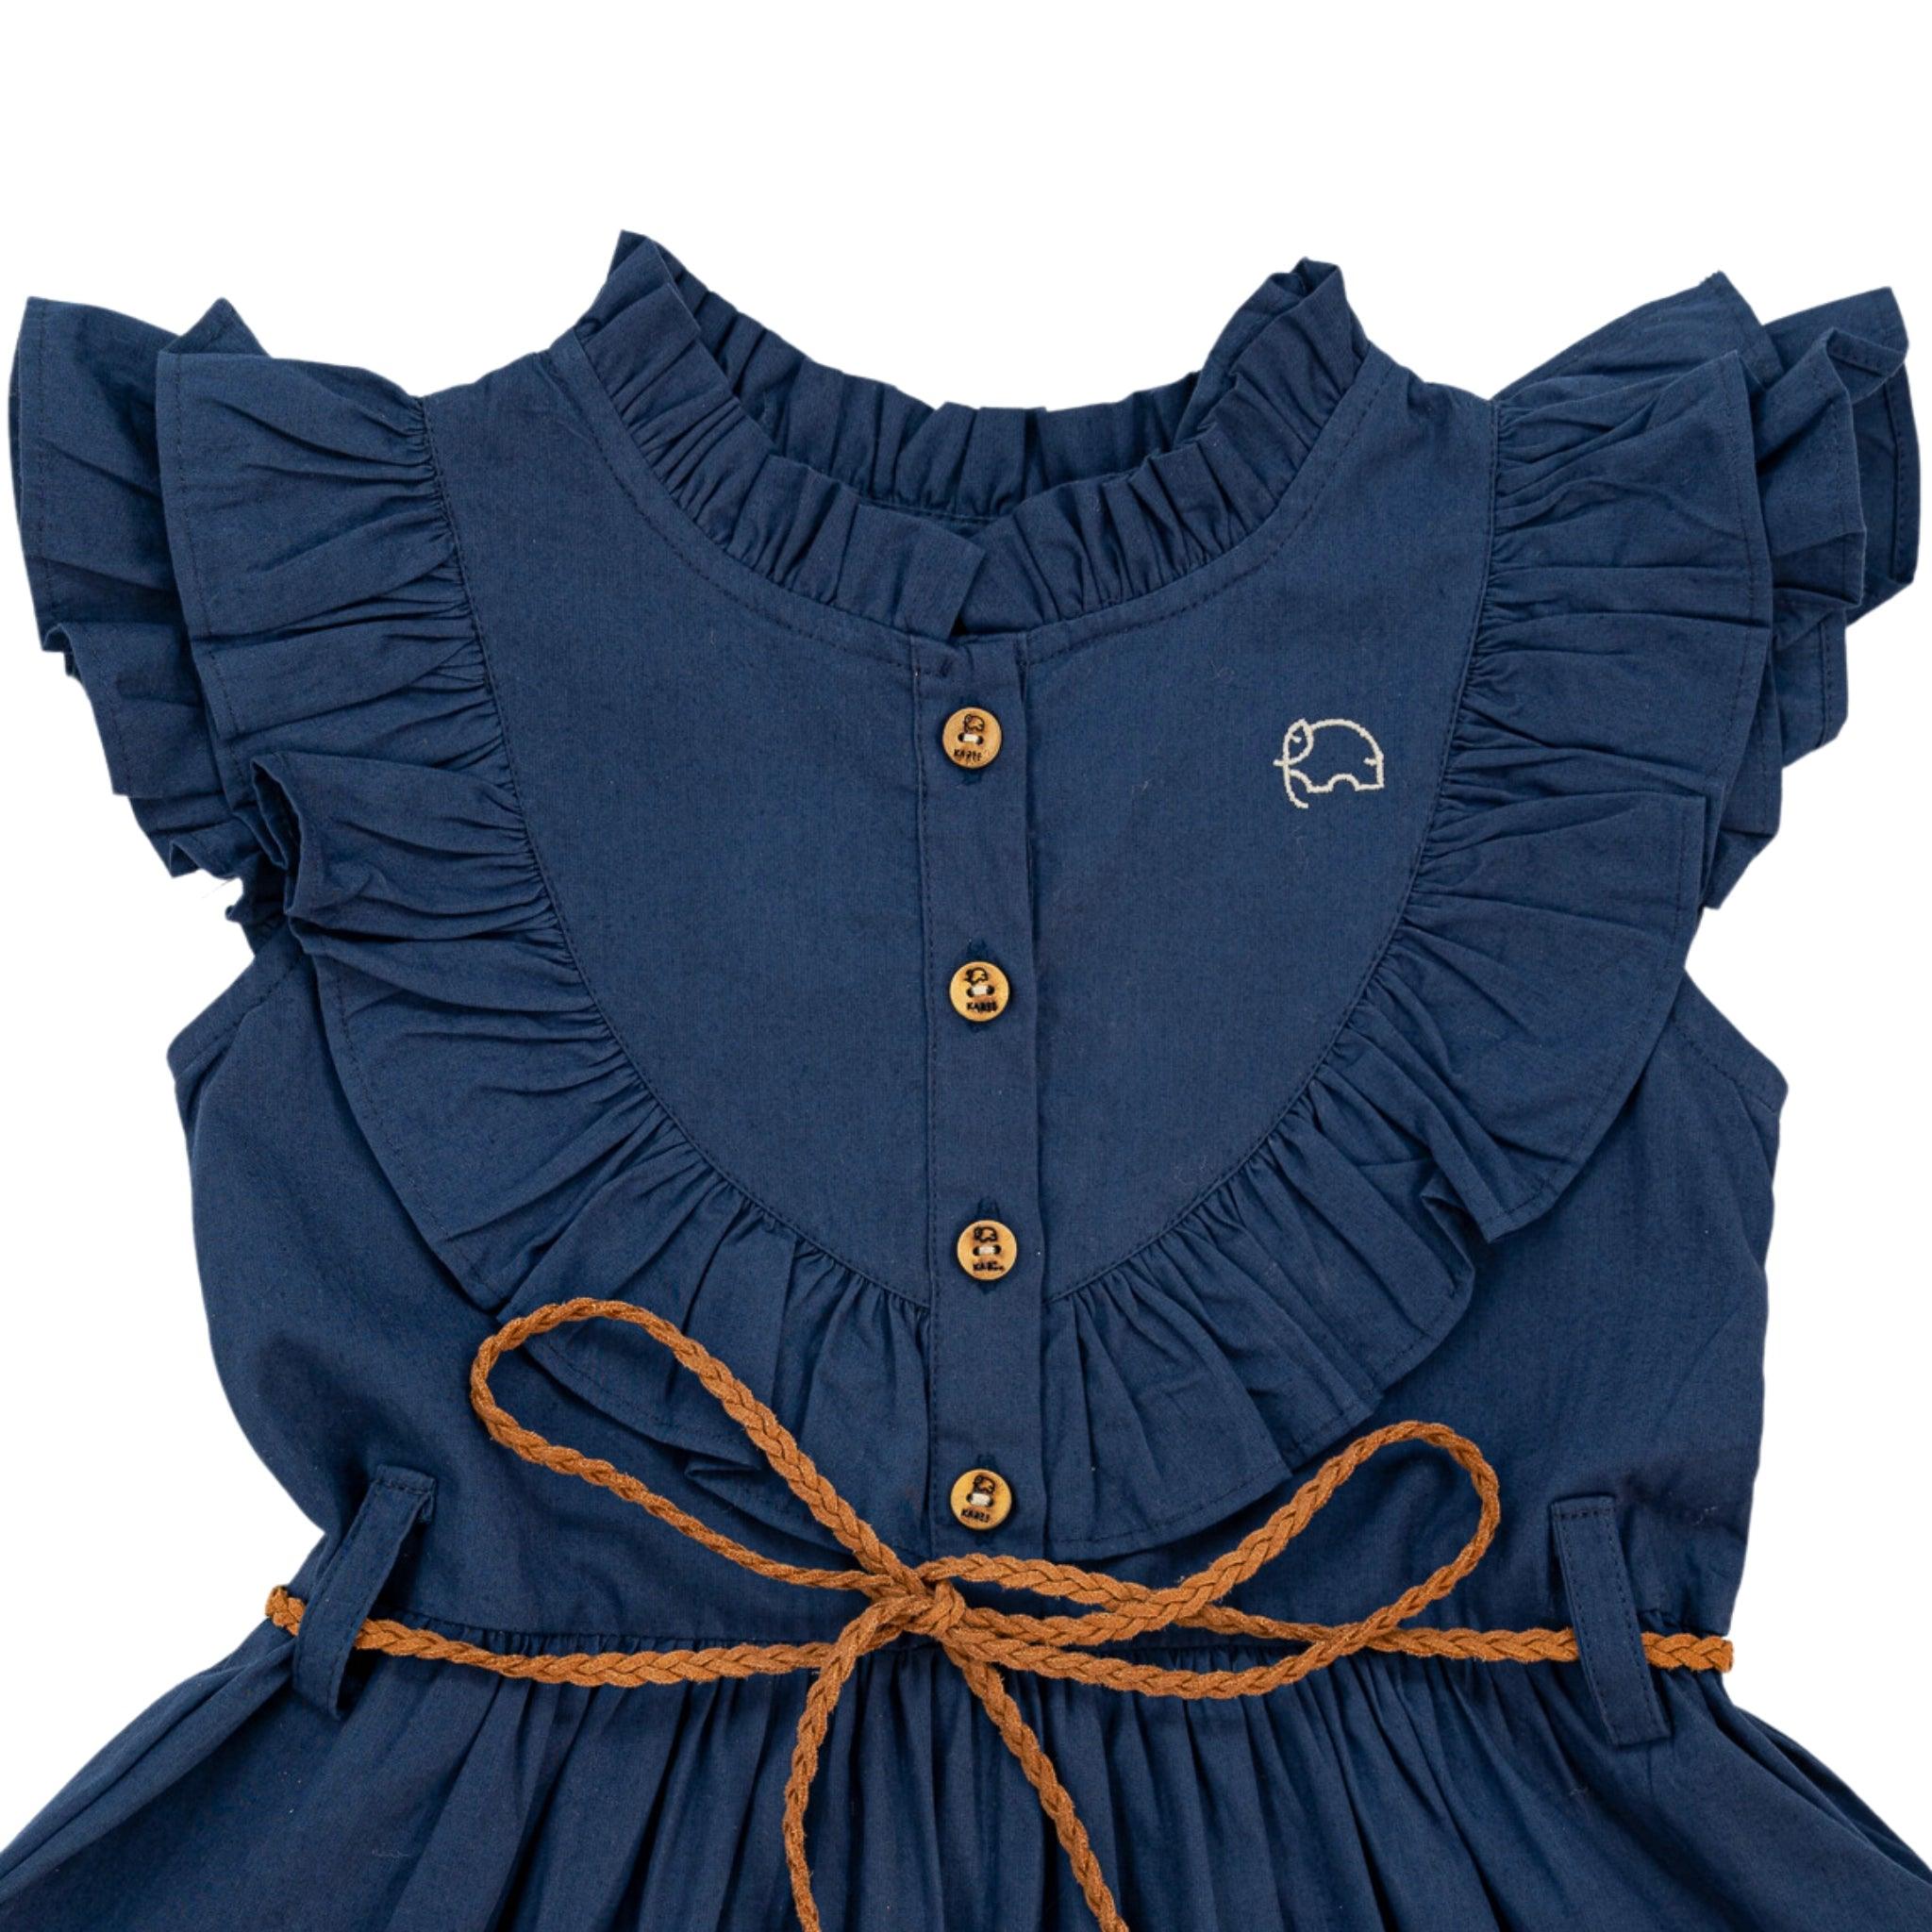 Karee Navy Blue Butterfly Sleeve Cotton Dress with front button closure and a braided brown belt, isolated on a white background.